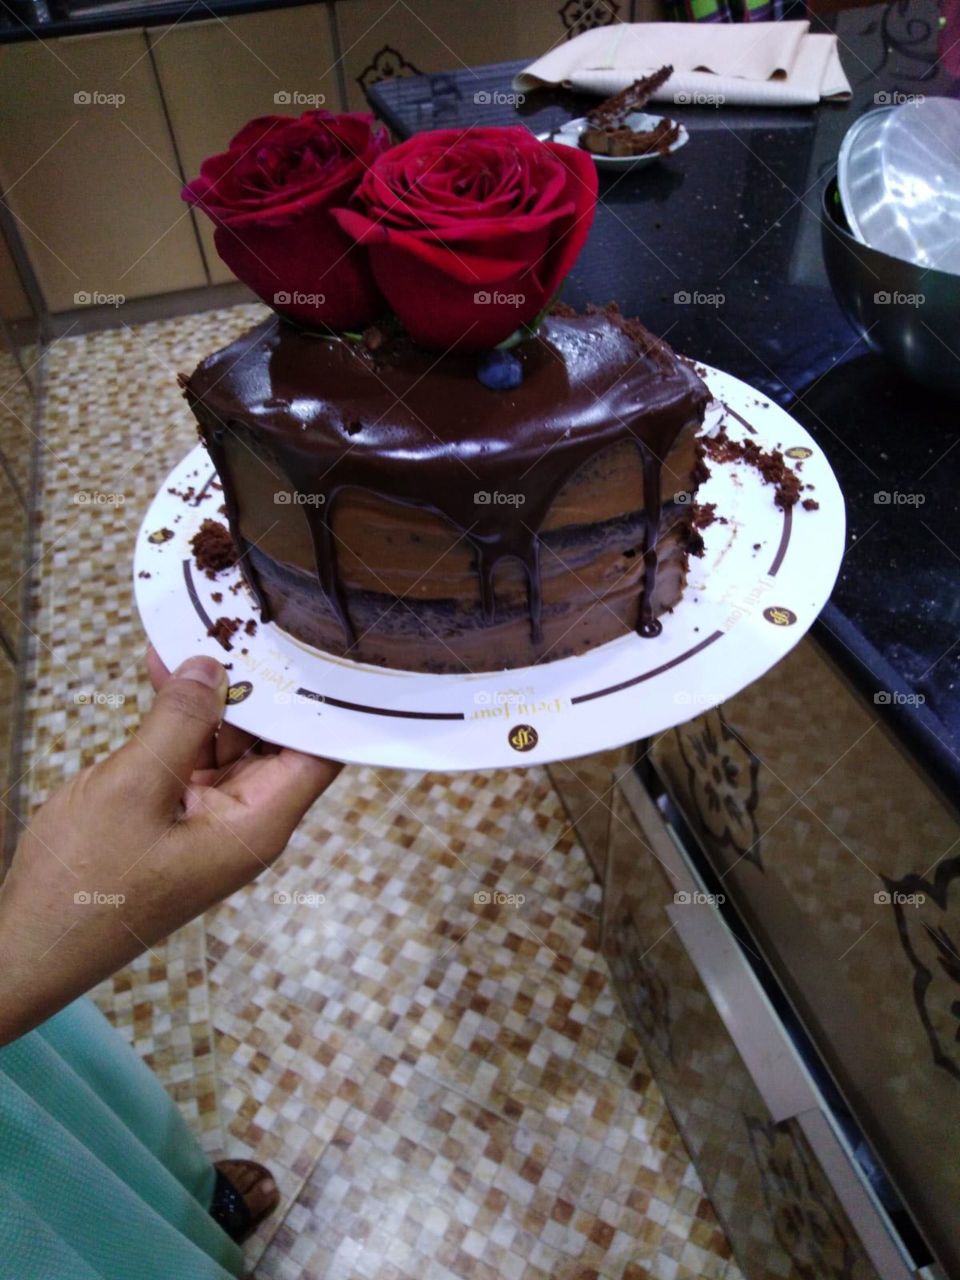 Chocolate with rose cream cake in my home made 